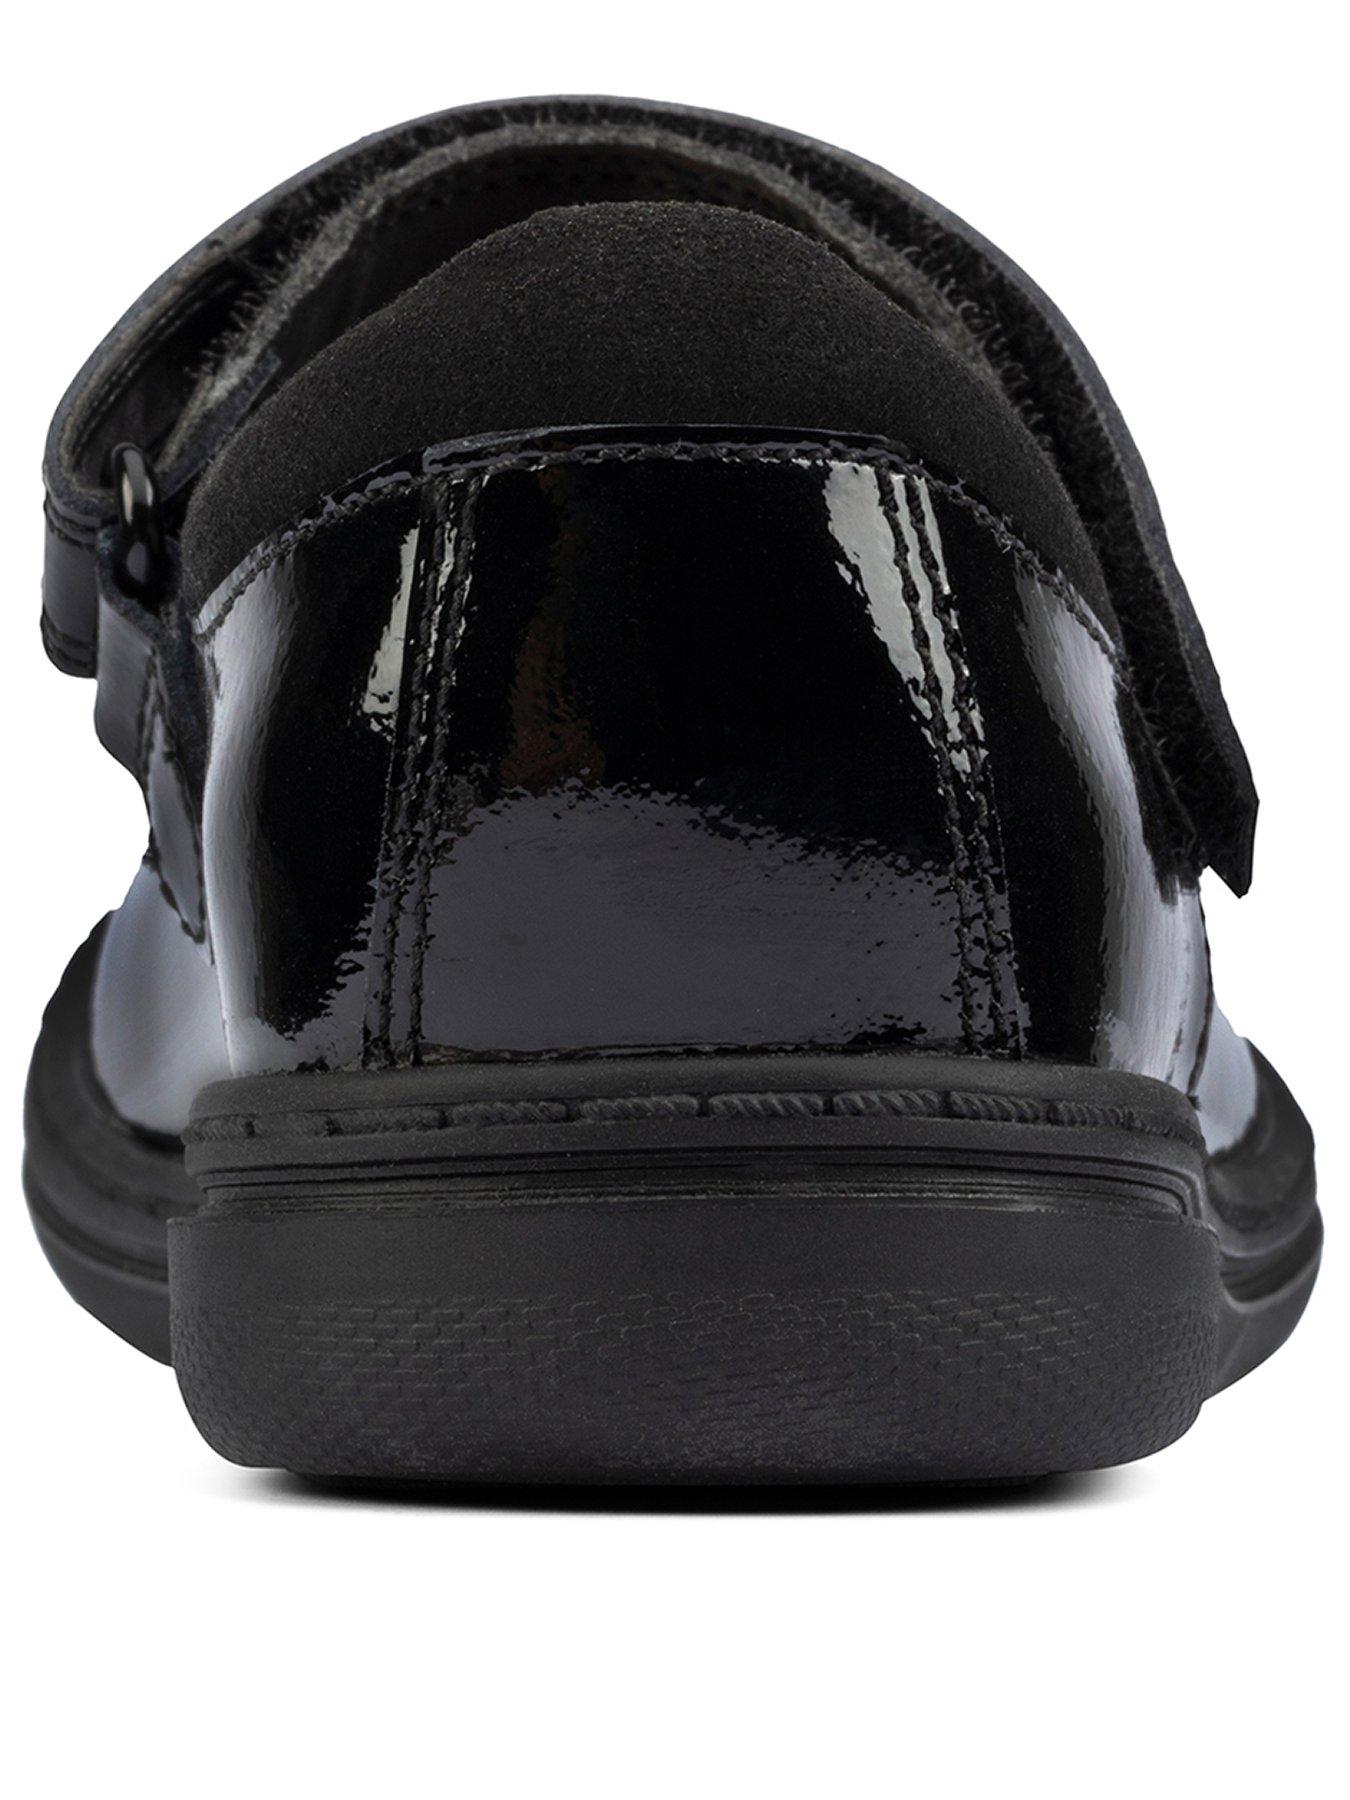  Toddler Scooter Daisy Strap School Shoes - Black Patent